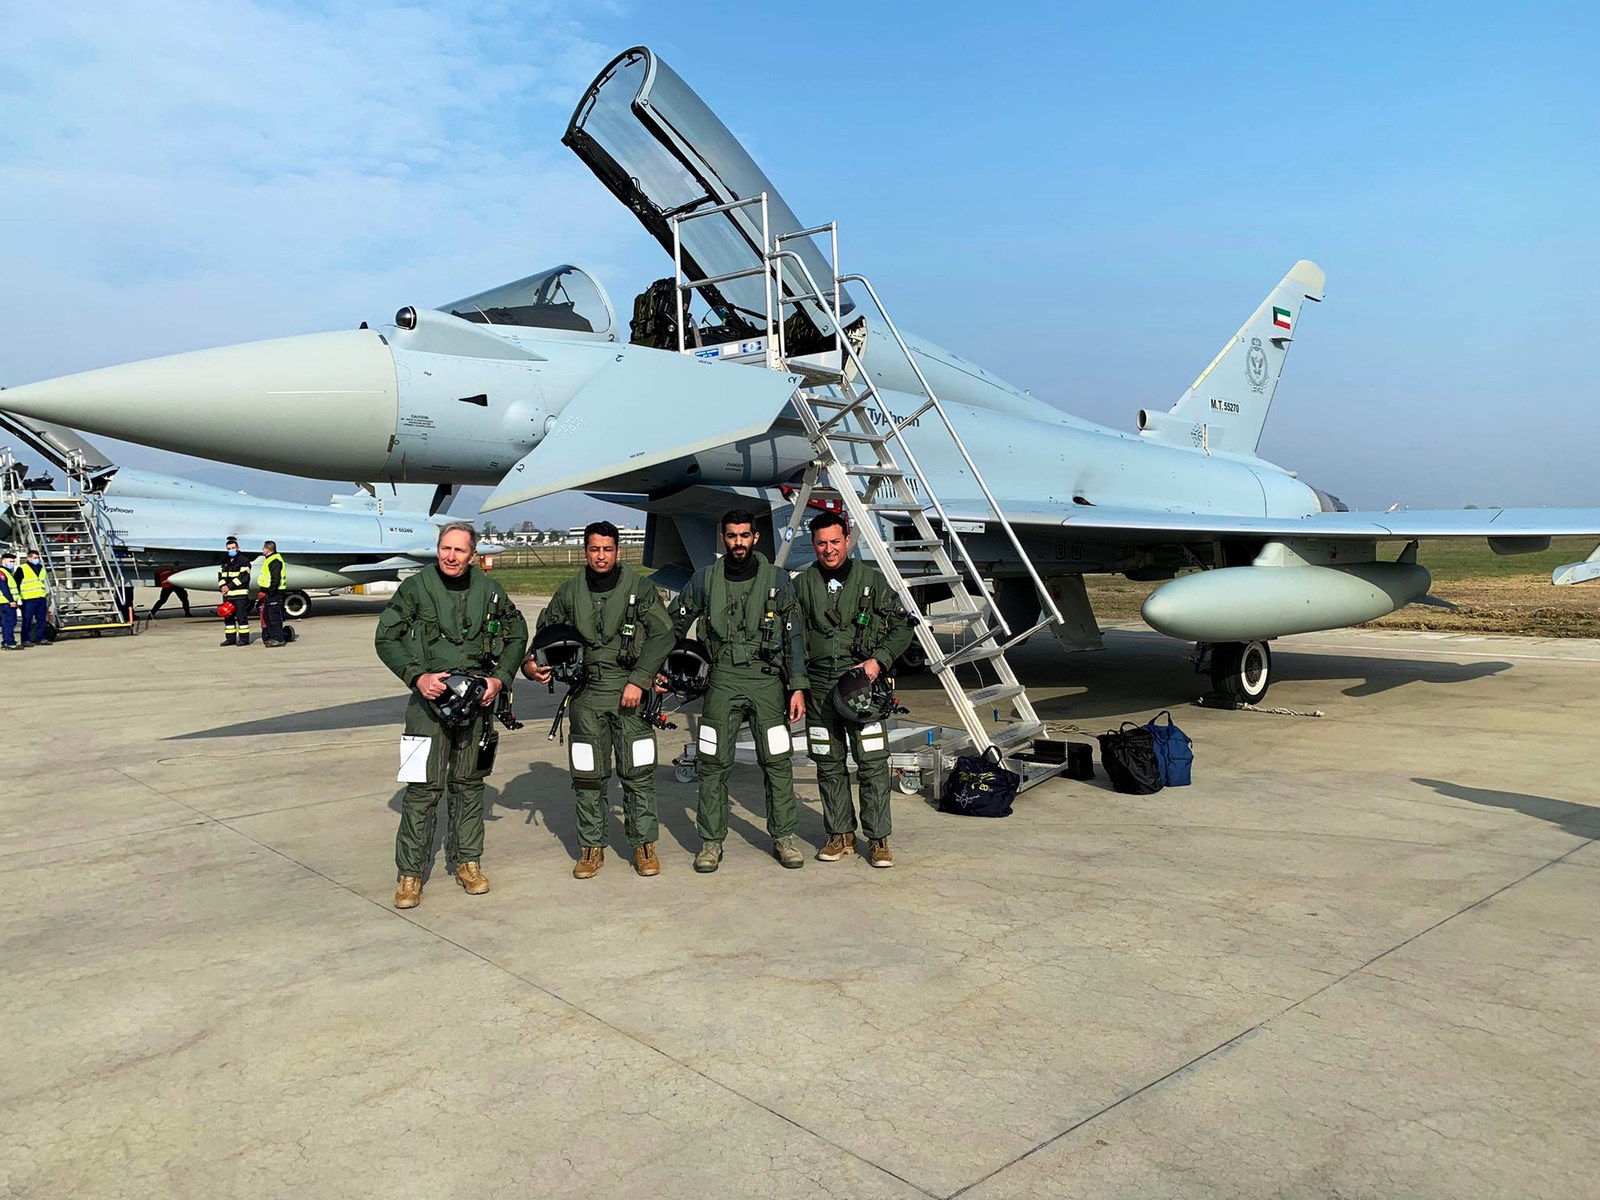 Kuwait air force Eurofighter - Member's Albums - CombatACE